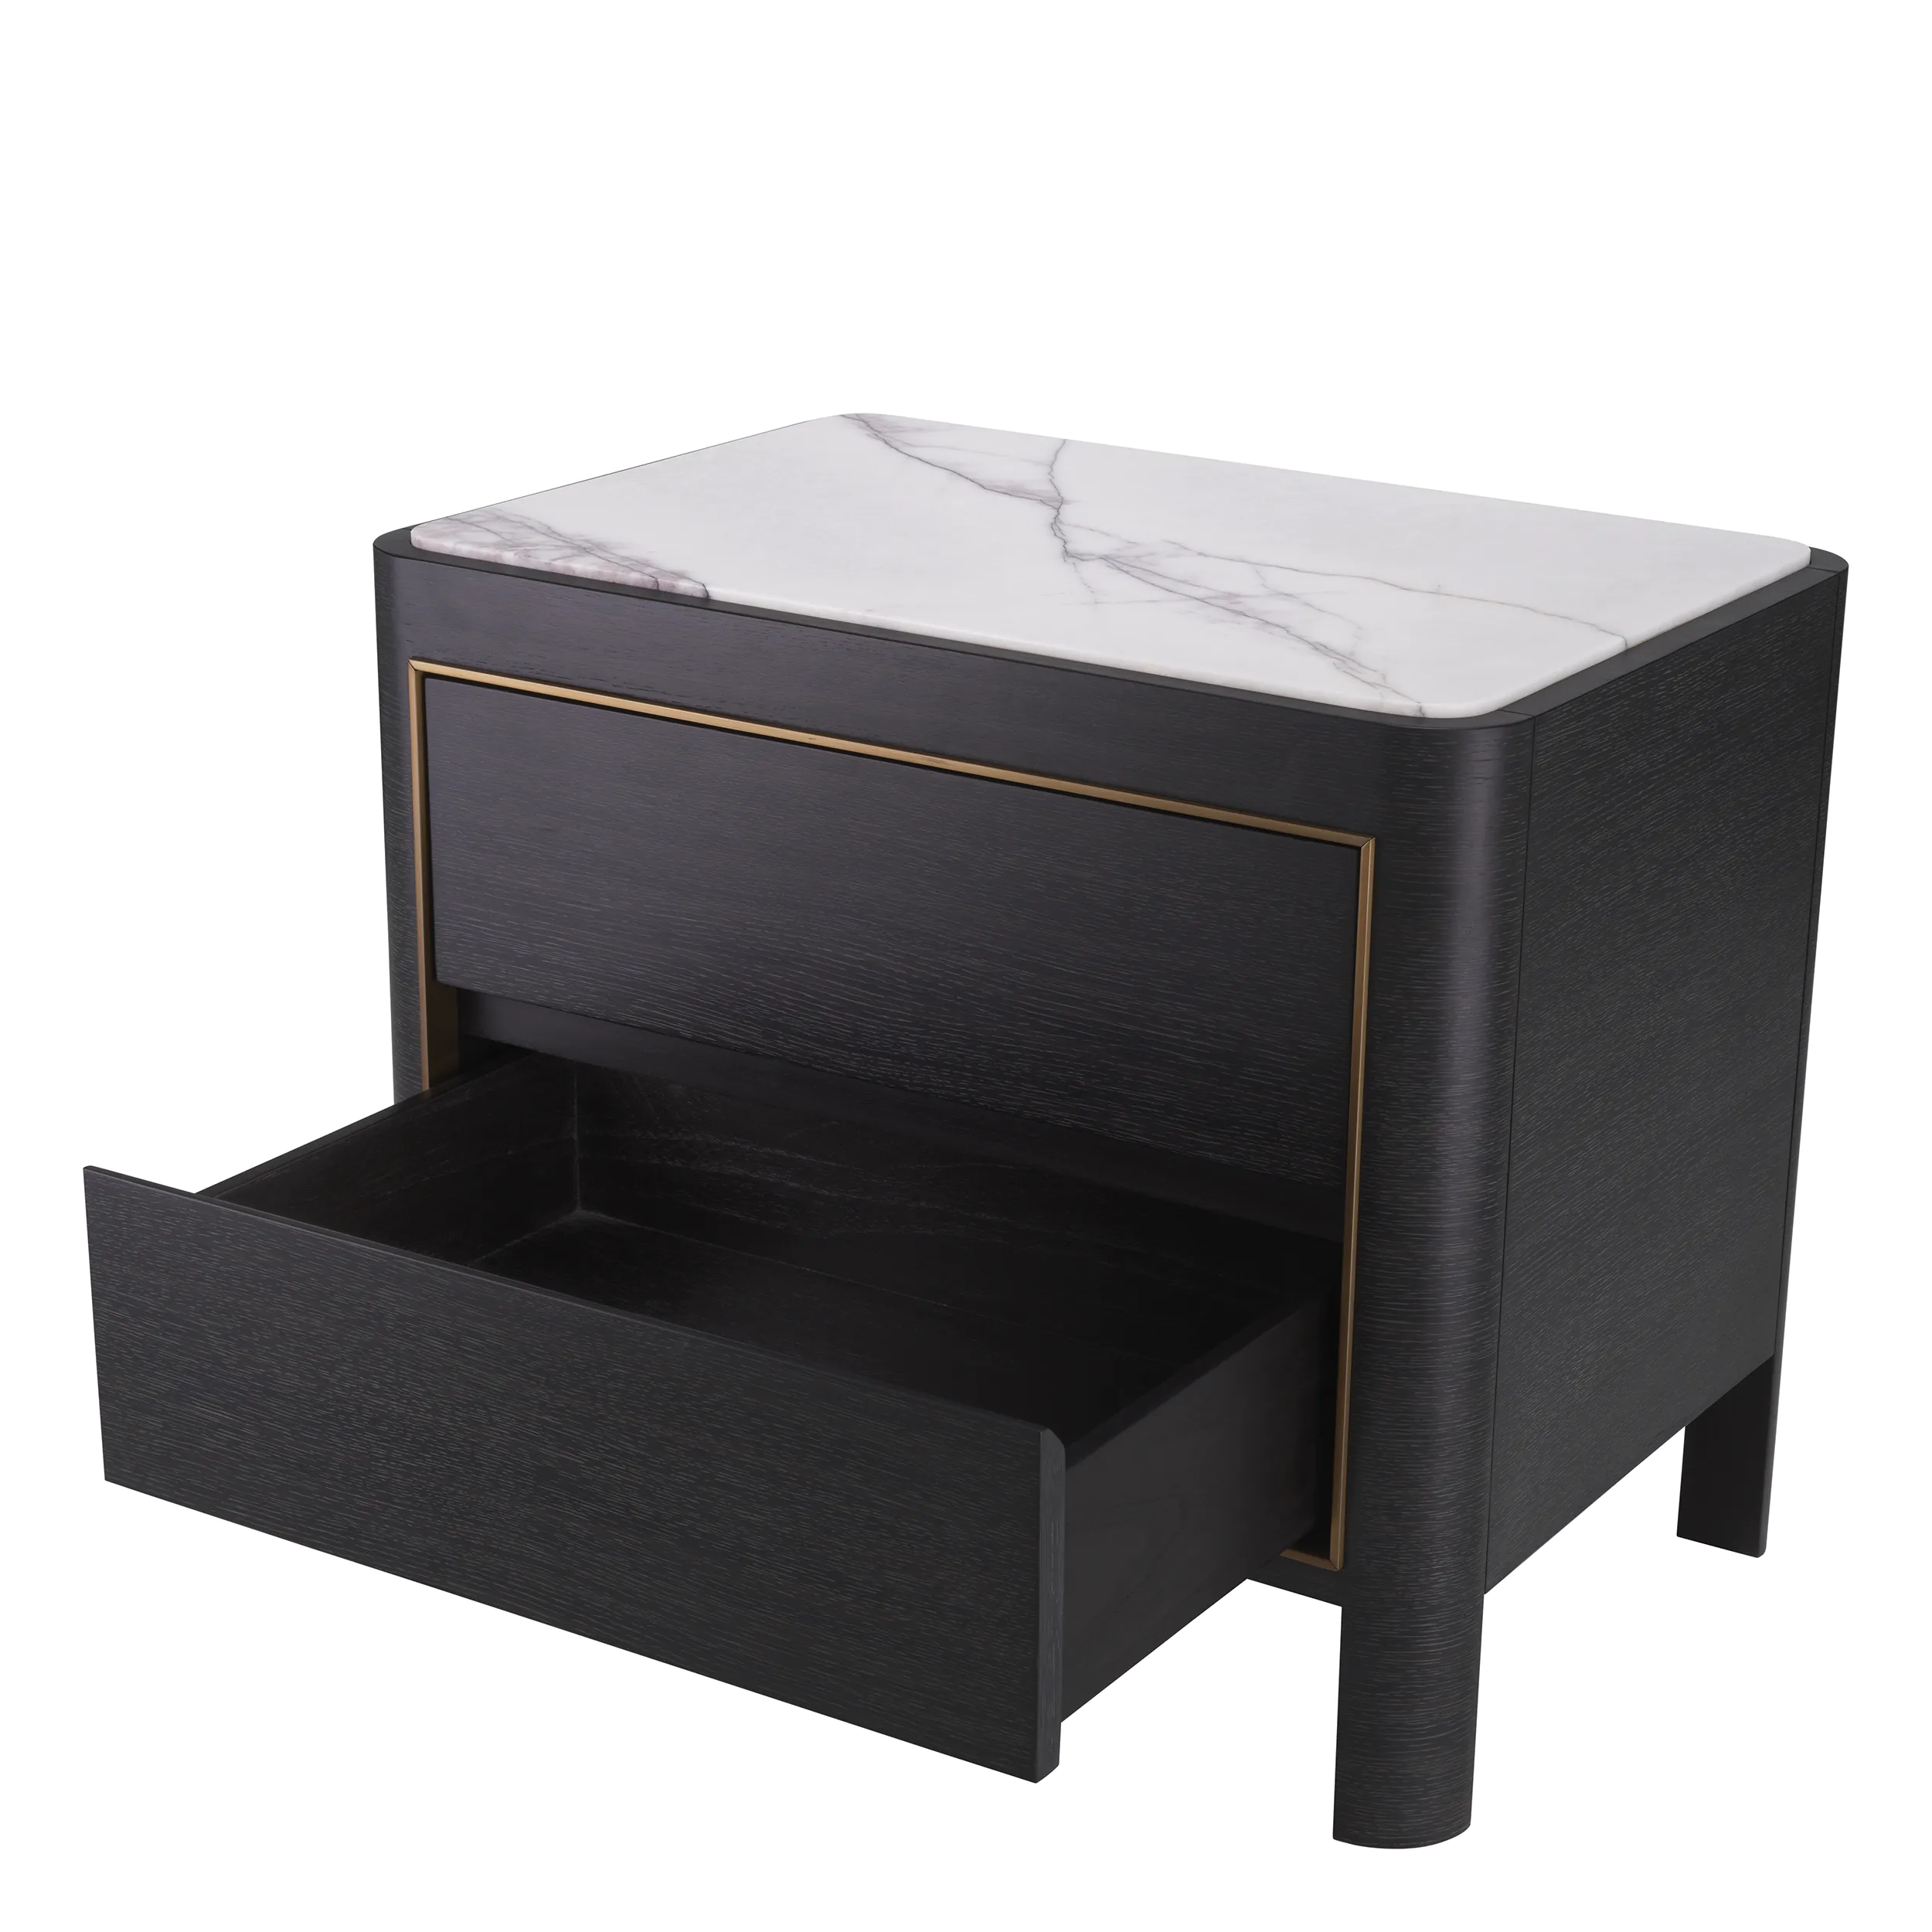 Corazon Bedside Table charcoal grey Eichholtz-115193-21id